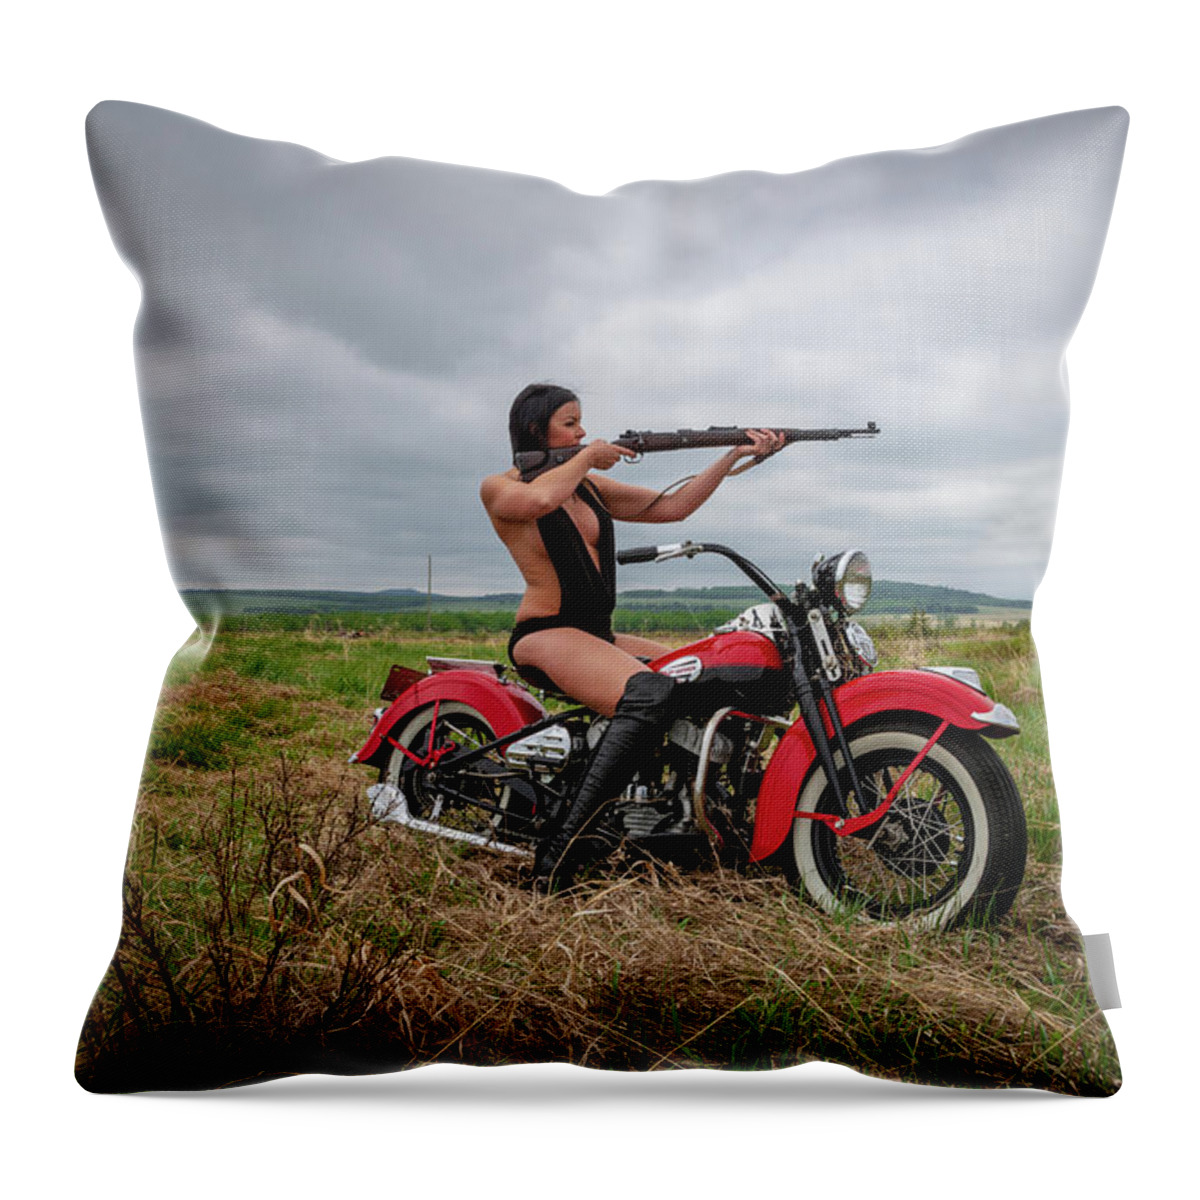 Motorcycle Throw Pillow featuring the photograph Motorcycle Babe by Bill Cubitt